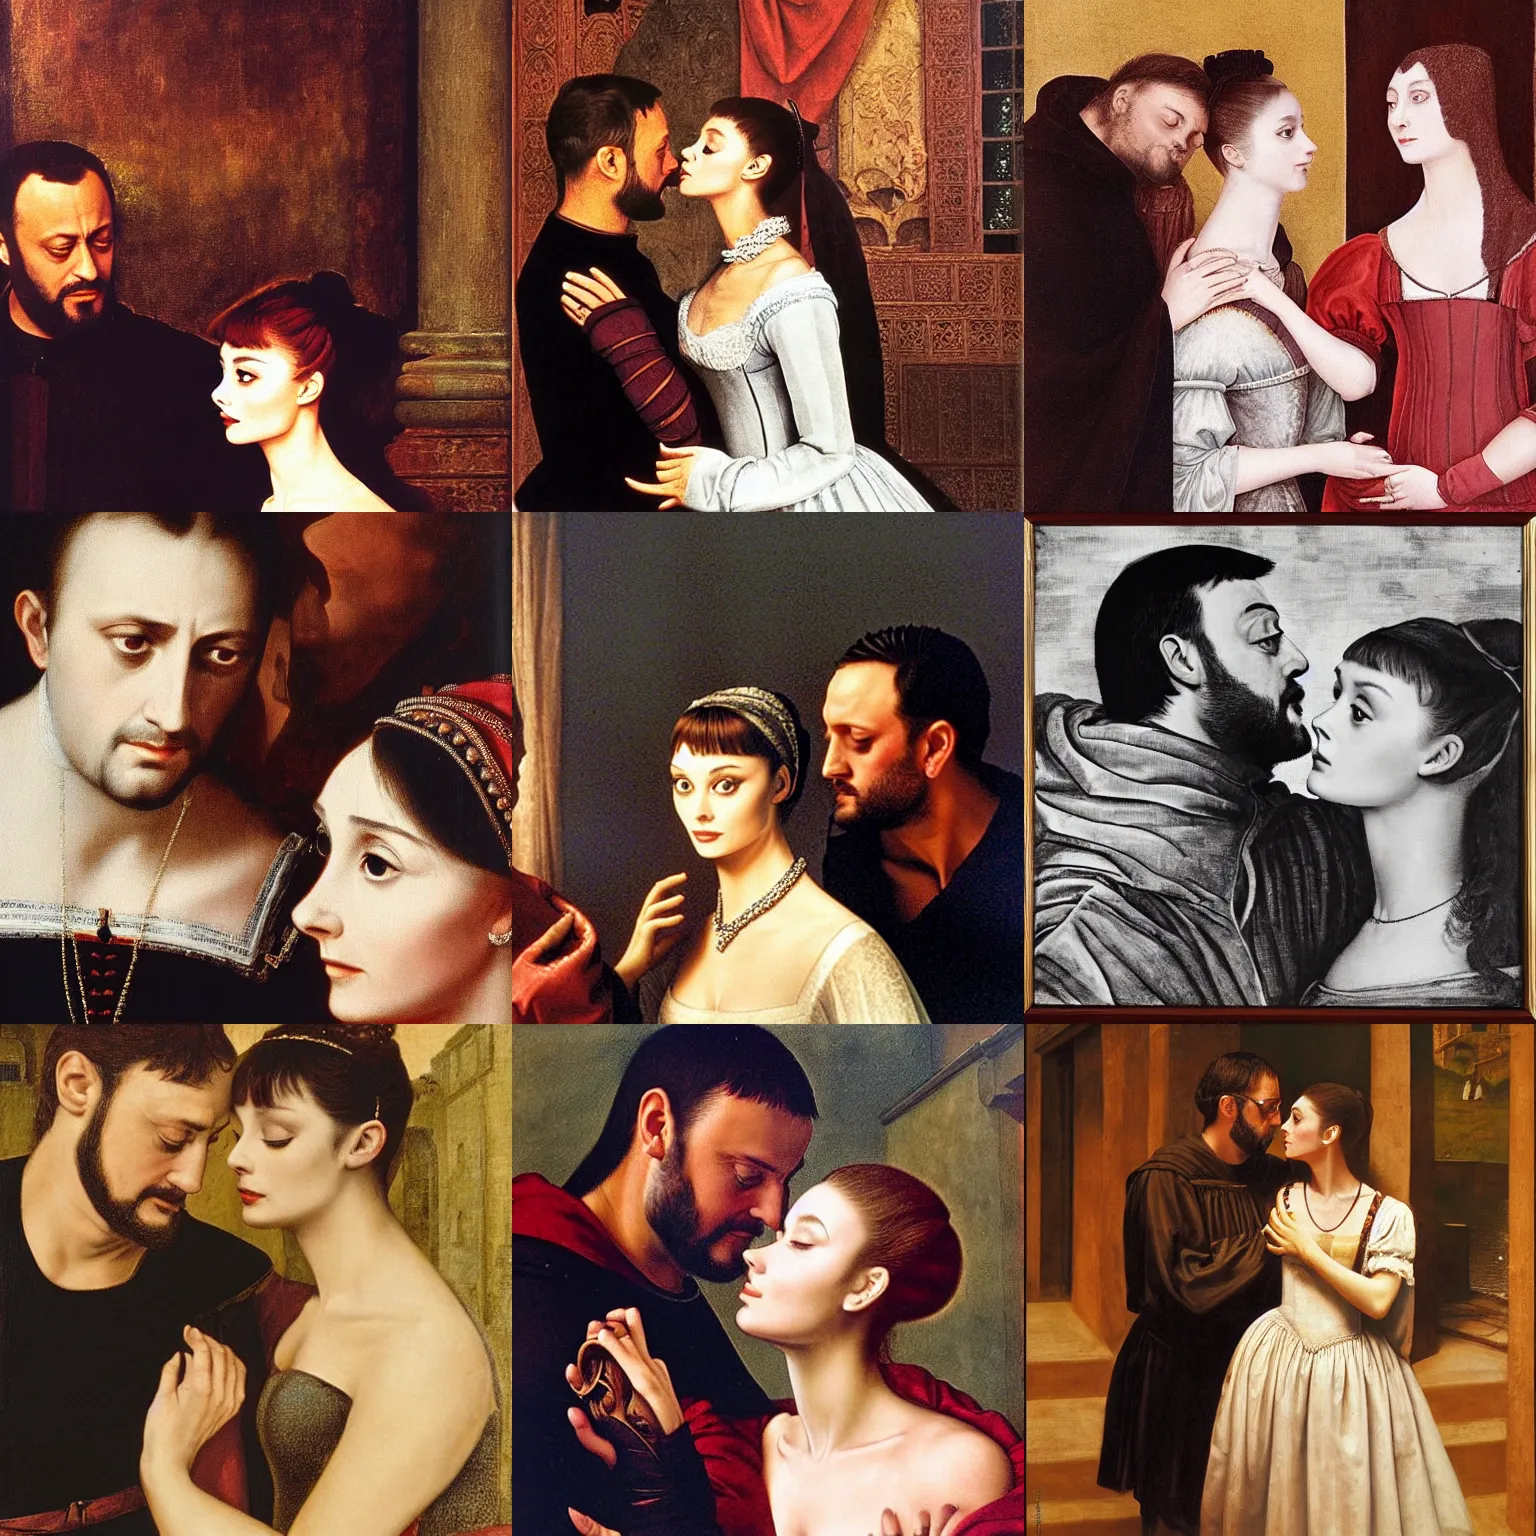 Prompt: Romeo (Jean Reno) and Juliet (Audrey Hepburn), are looking at each other romantically in a 15th century, tragic drama. dramatic, romantic, theatrical, lumnious, theatrical lighting, cinematic lights, oil canvas by Frank Dicksee, Alfred Elmore, Mather Brown